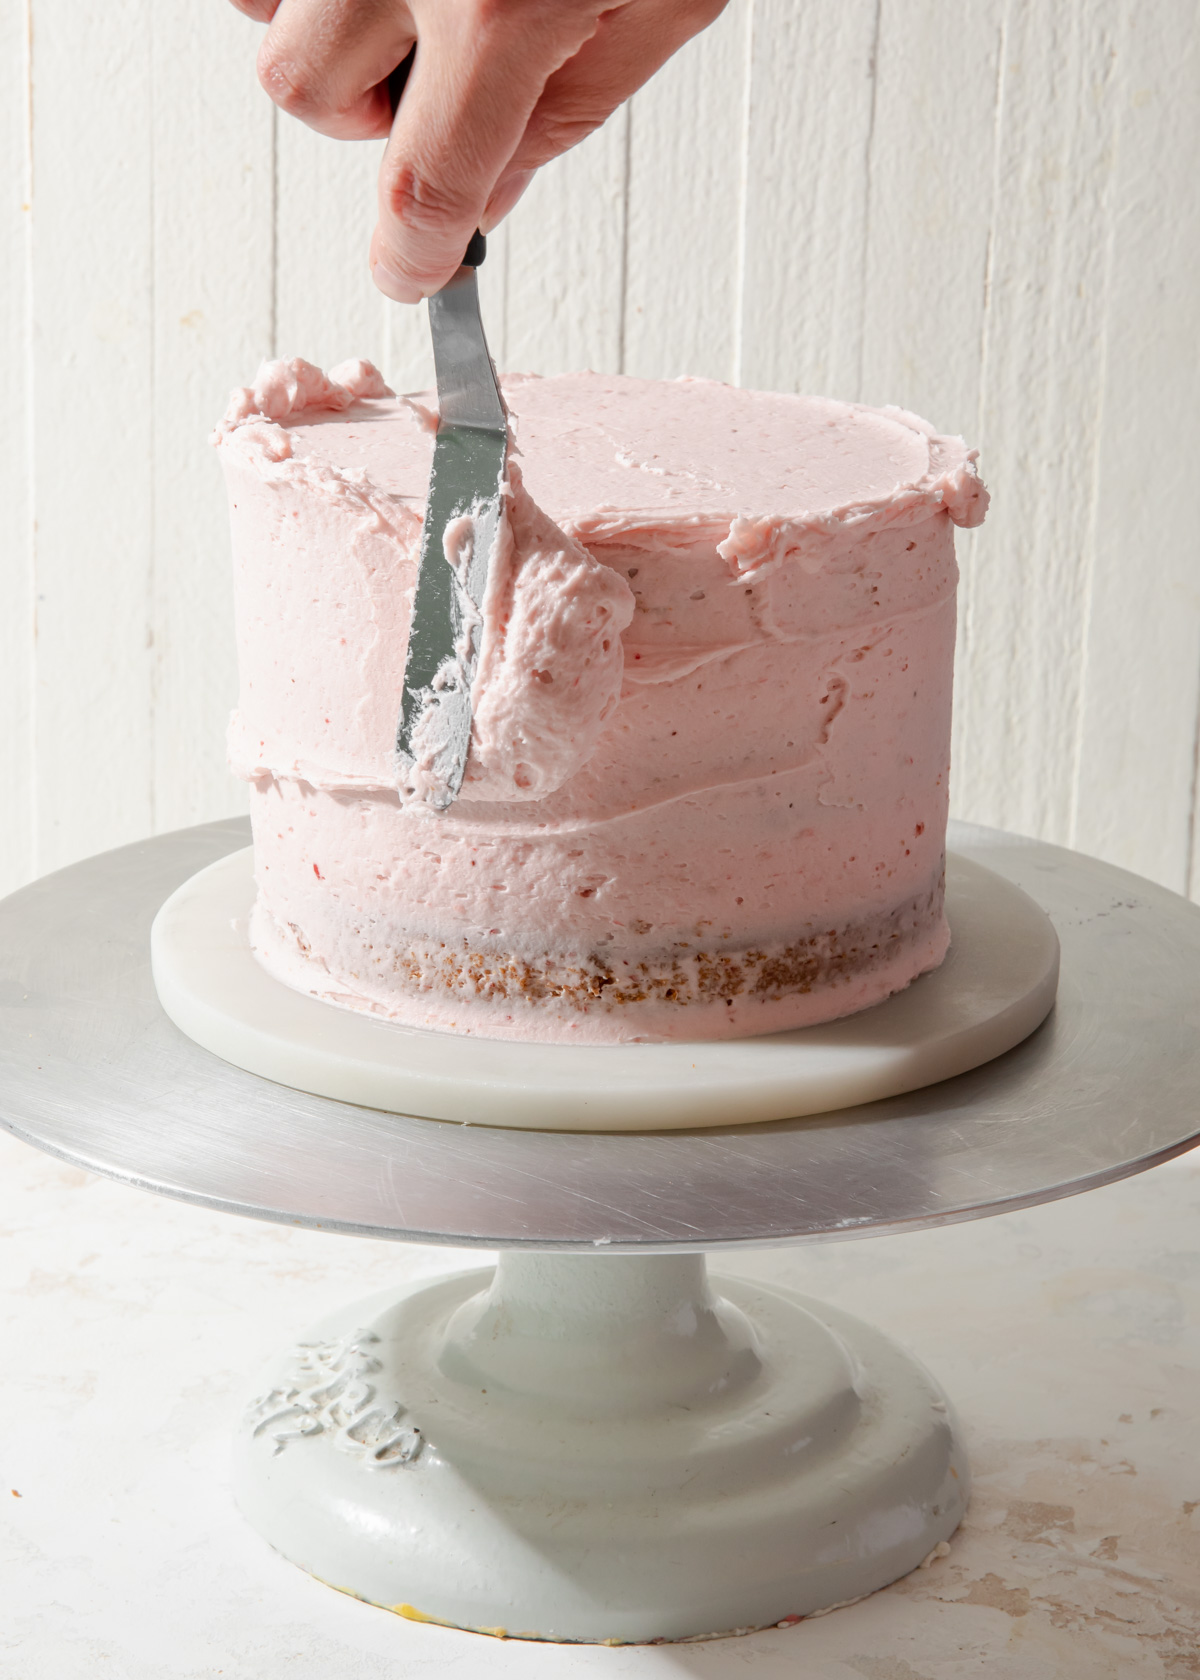 Icing a cake with strawberry buttercream